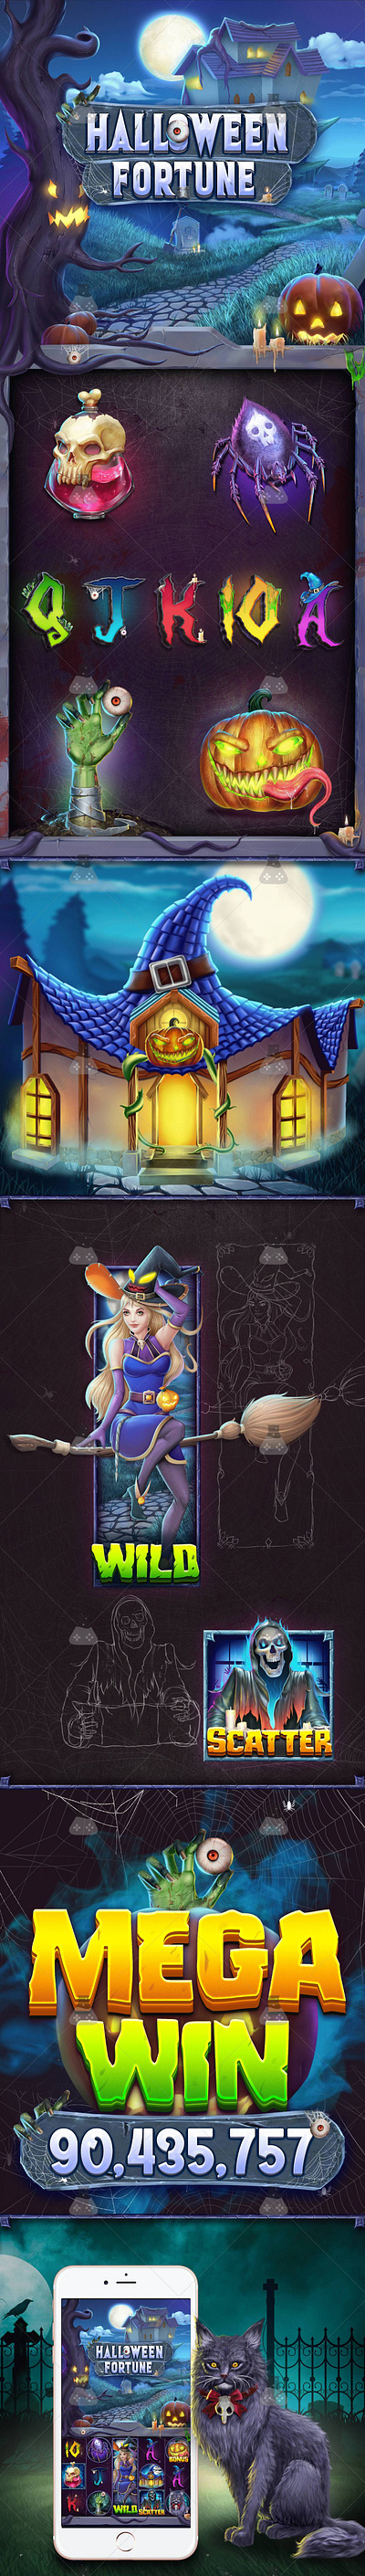 Slot Game Theme Character By Gamix Labs 2d artwork animation game characters game development gamix labs halloween slot halloween slot art halloween slot theme art horror slot art horror theme illustration slot slot art services slot machine slot services